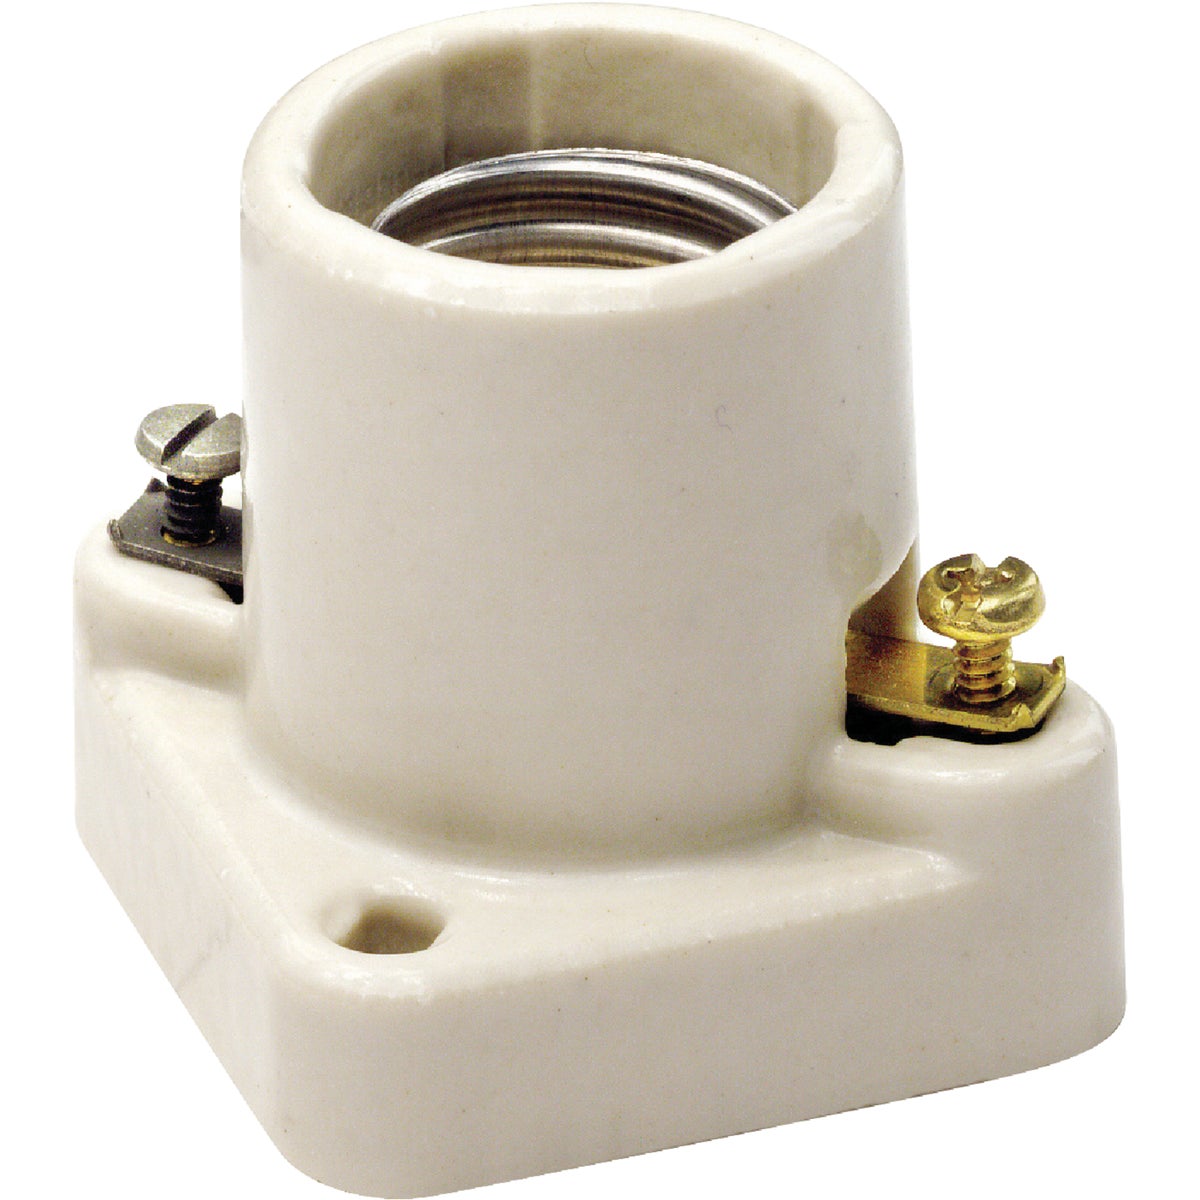 Item 513723, Surface mounted. Medium base with open terminals. 1-7/8 In. O.D.